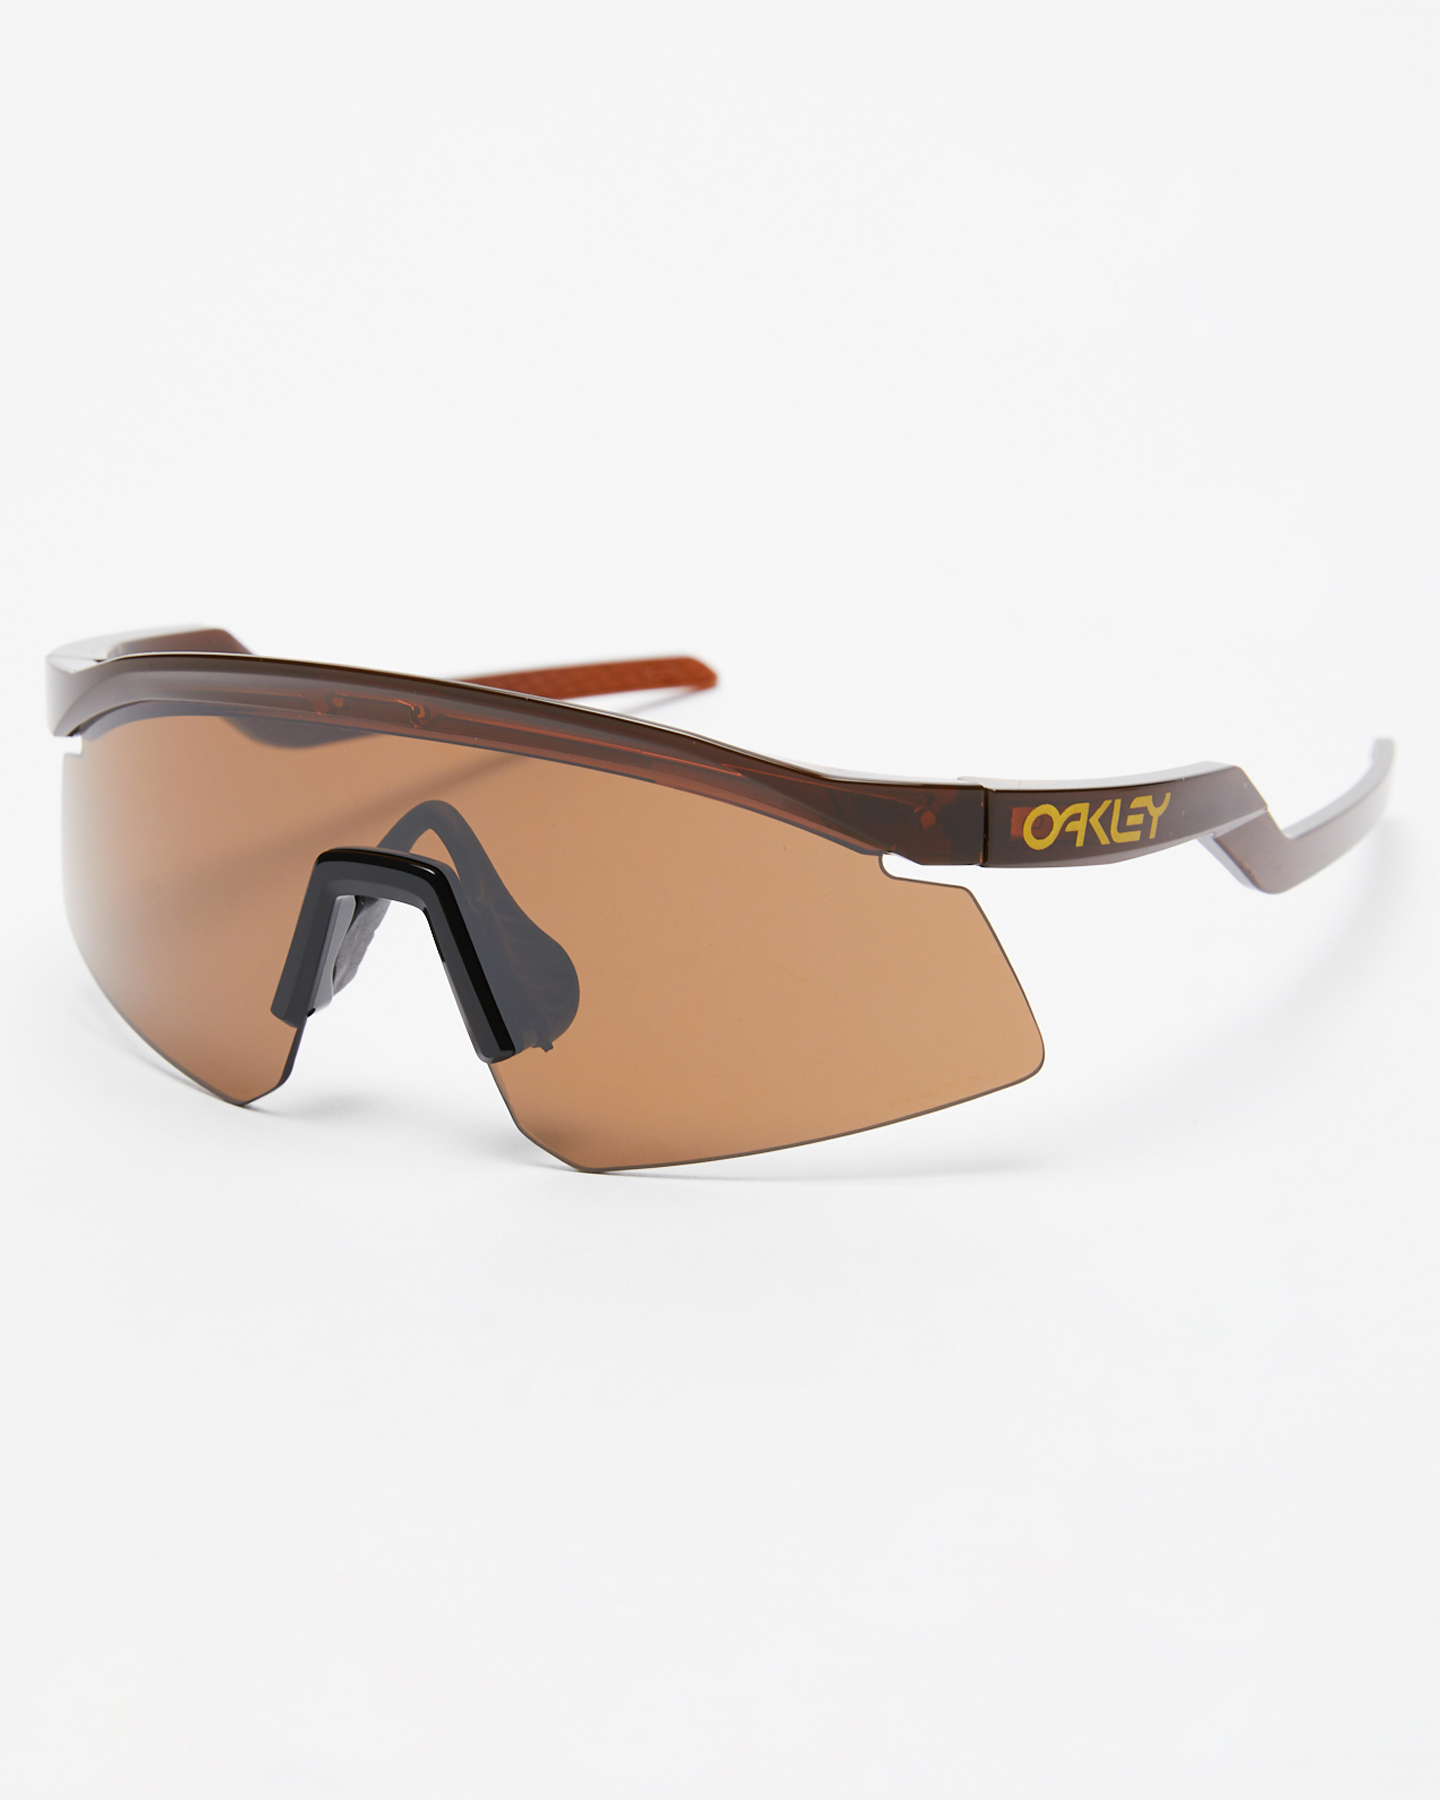 Oakley Hydra Sunglasses - Rootbeer | SurfStitch